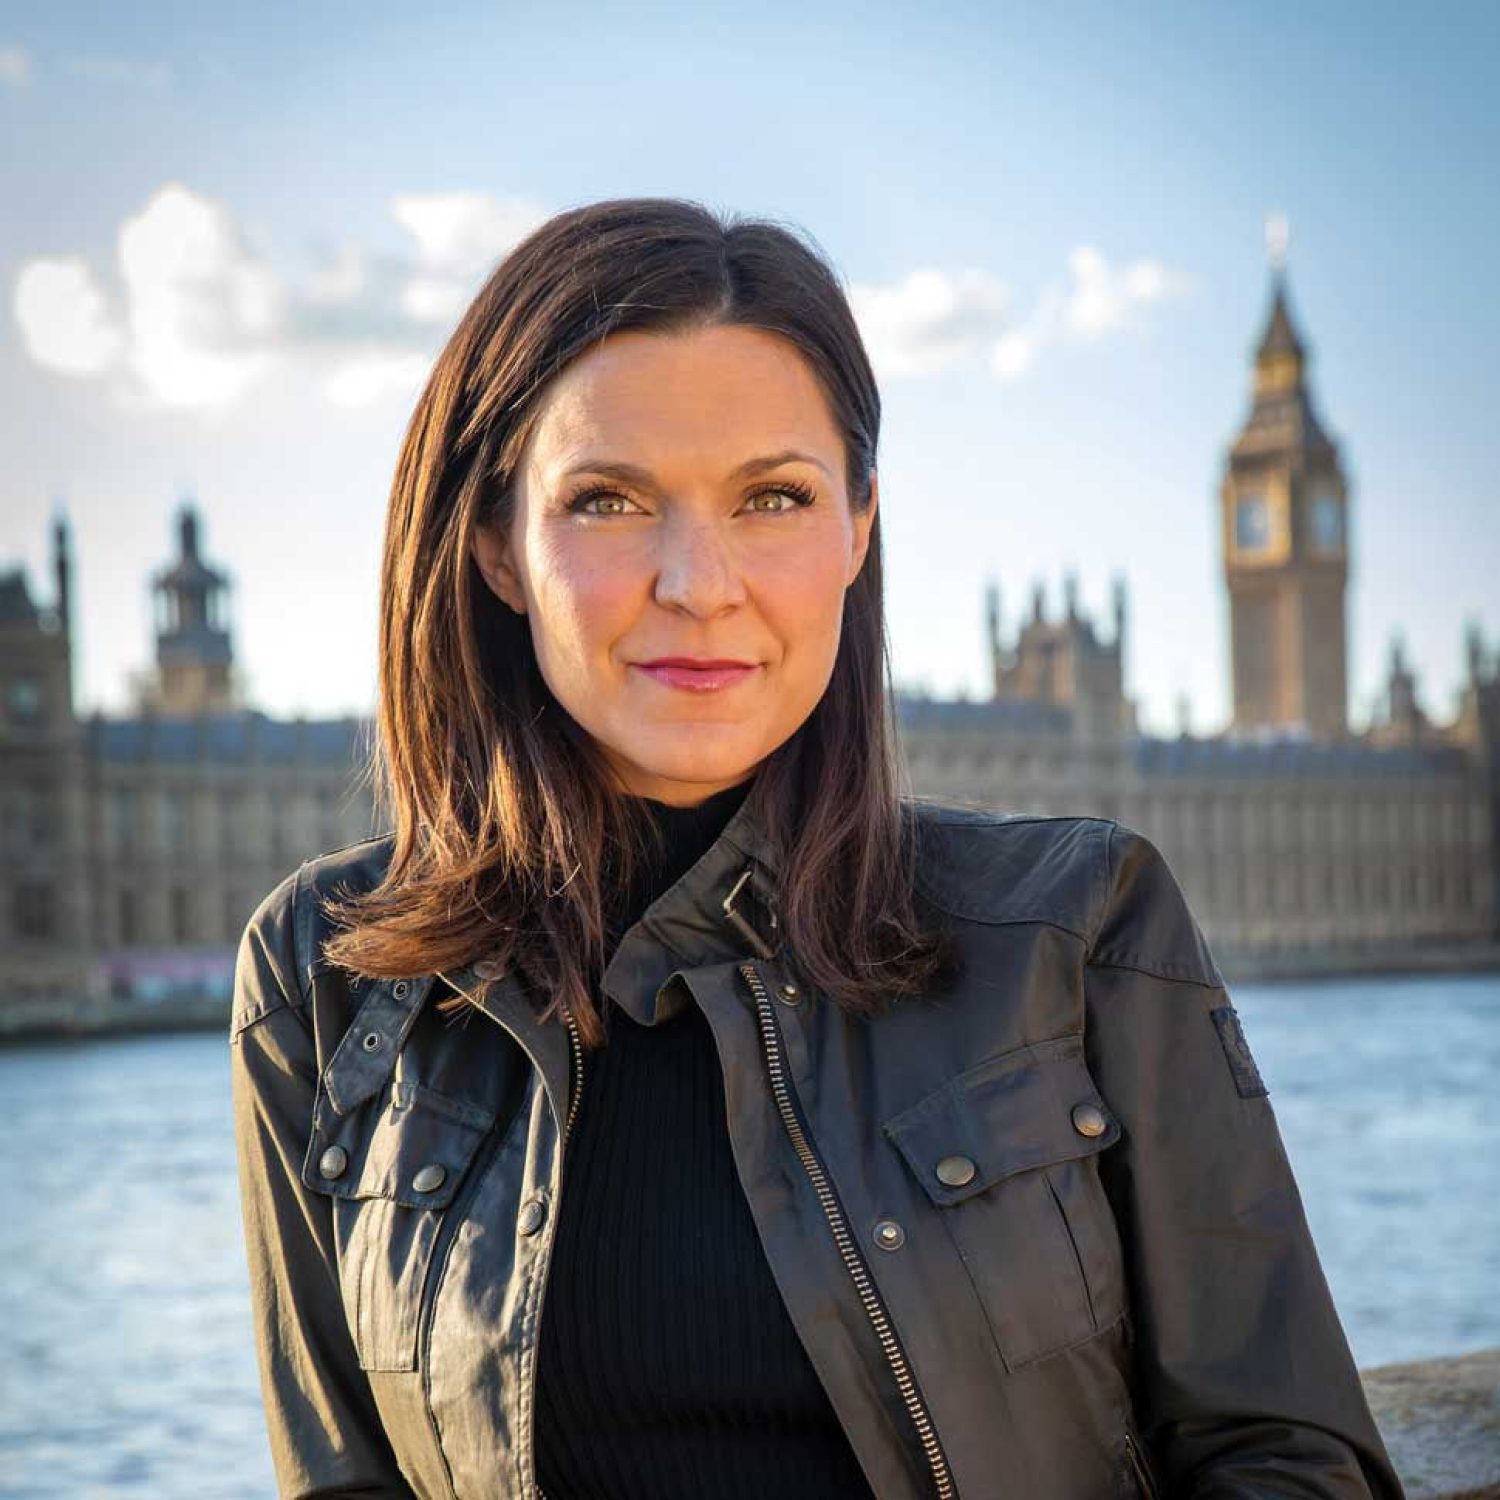 Maggie Rulli photographed in front of the Parliment buildings in London.